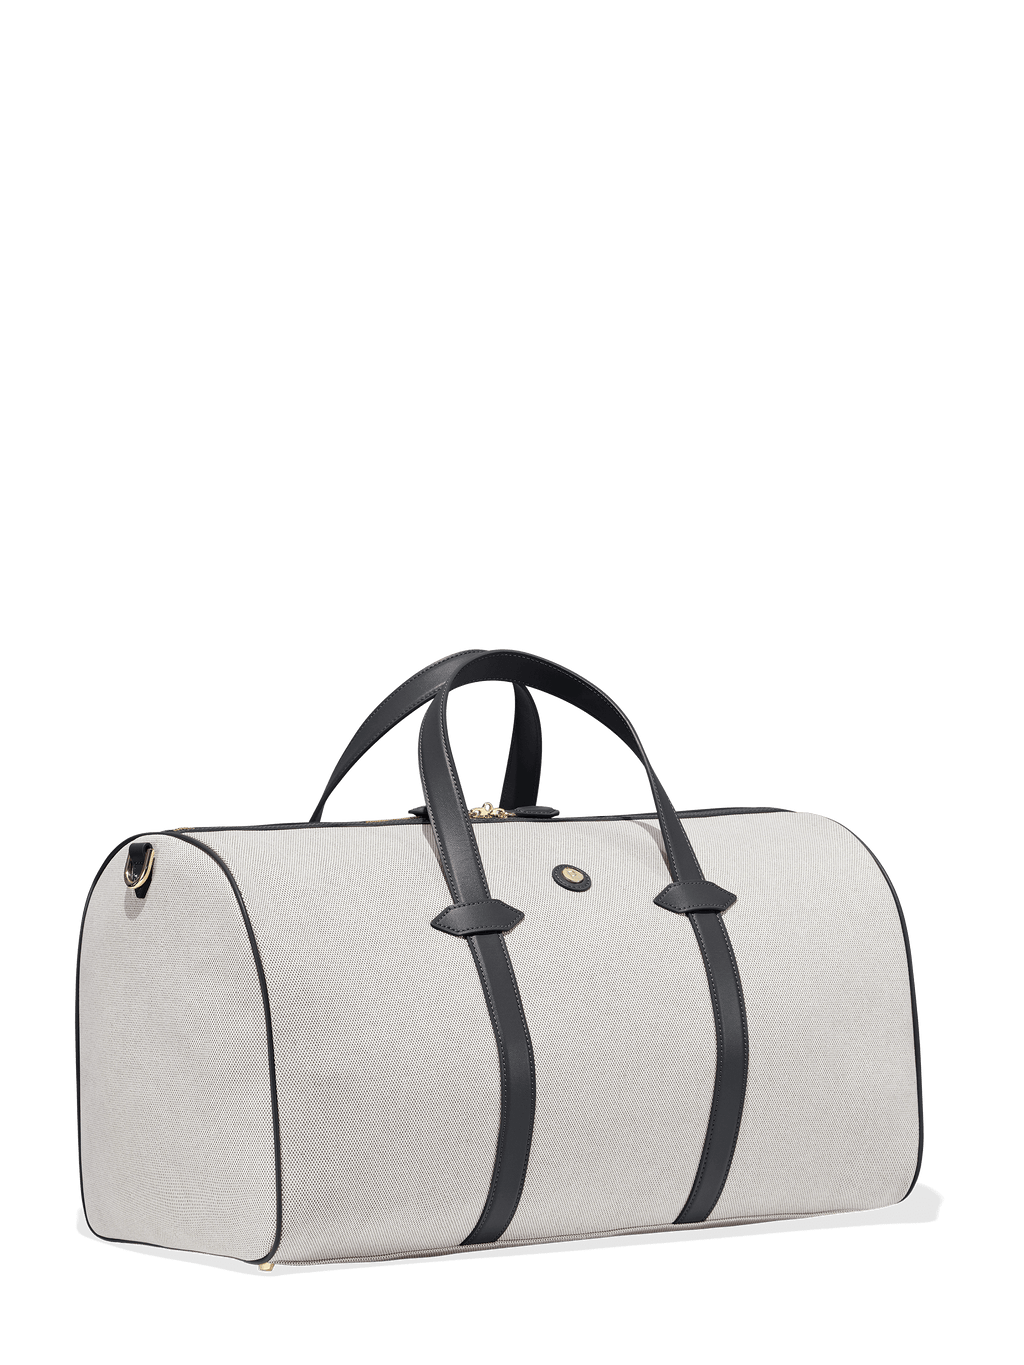 Lv Travelling, Gym And Sports Bag Best Price In Pakistan